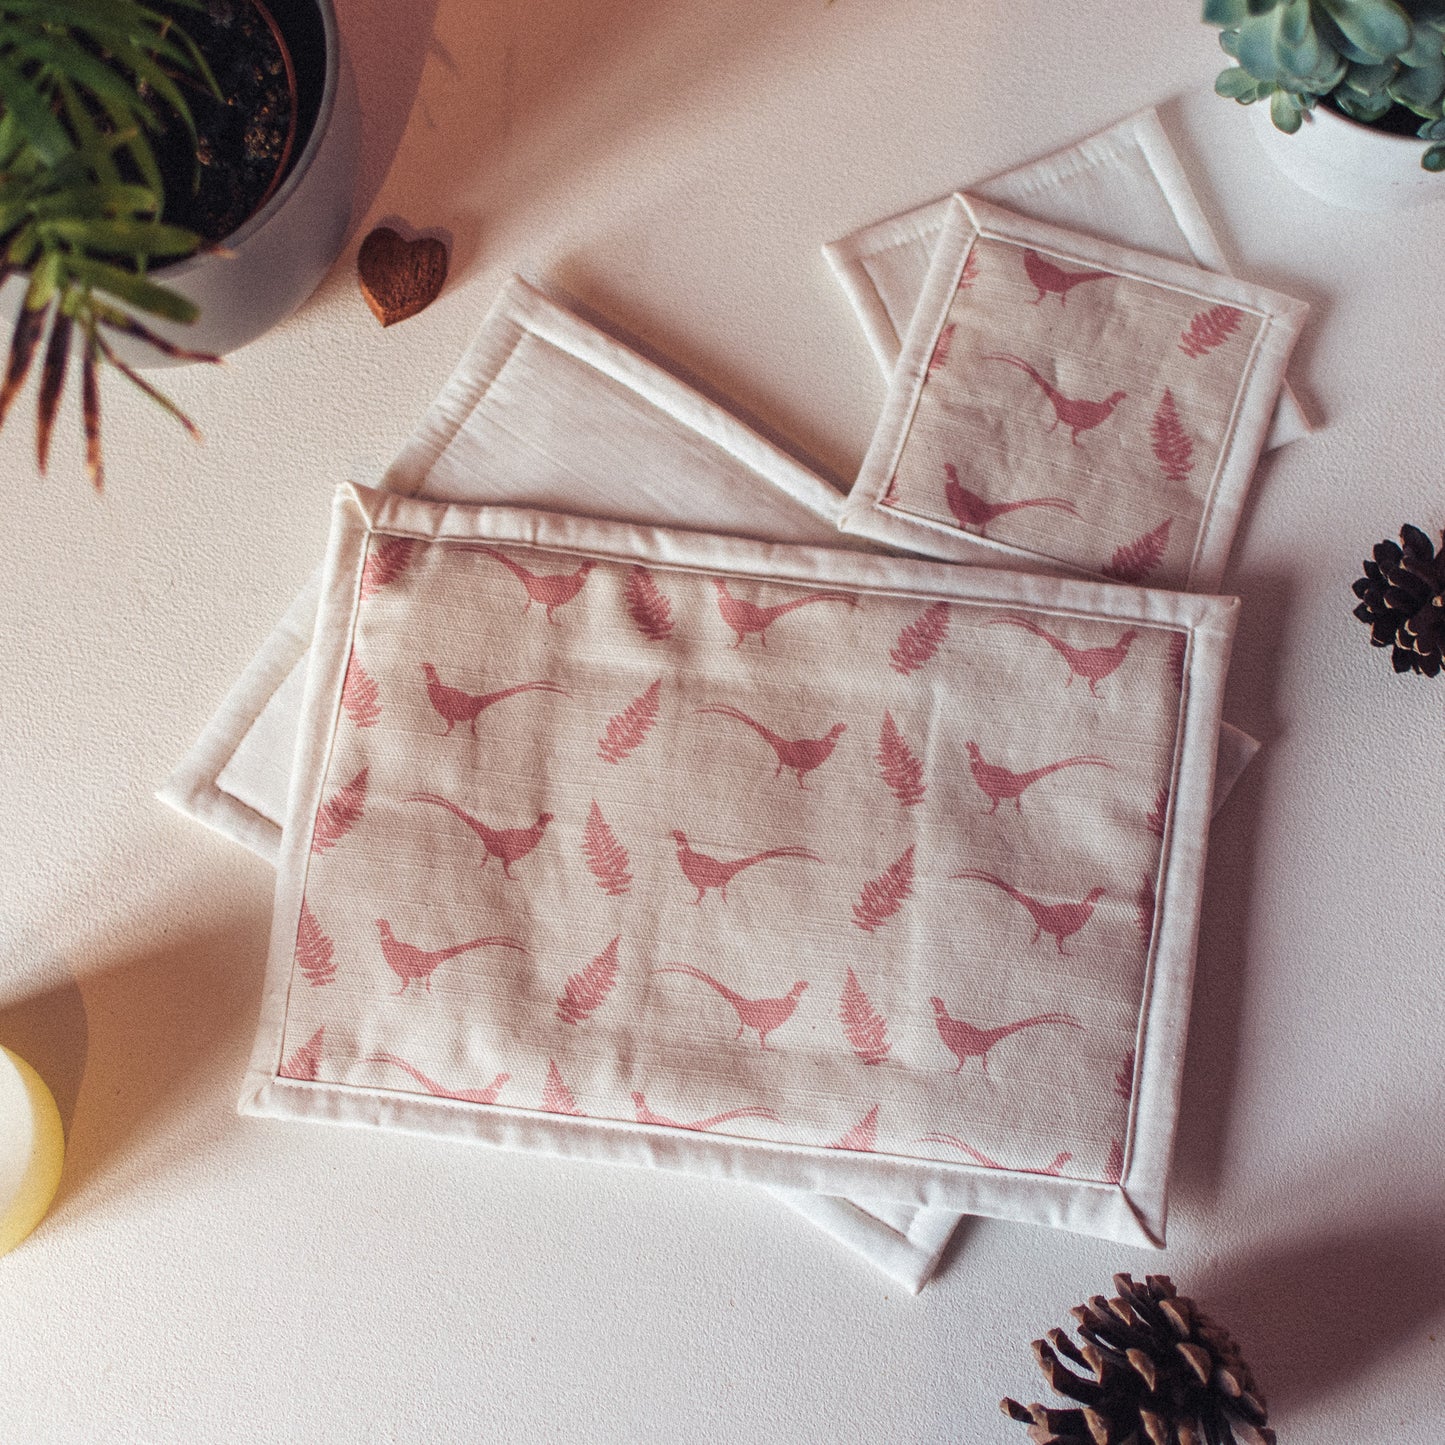 F&B Crafts Pink Pheasant & Fern Mats and Coasters - Handmade in Yorkshire 